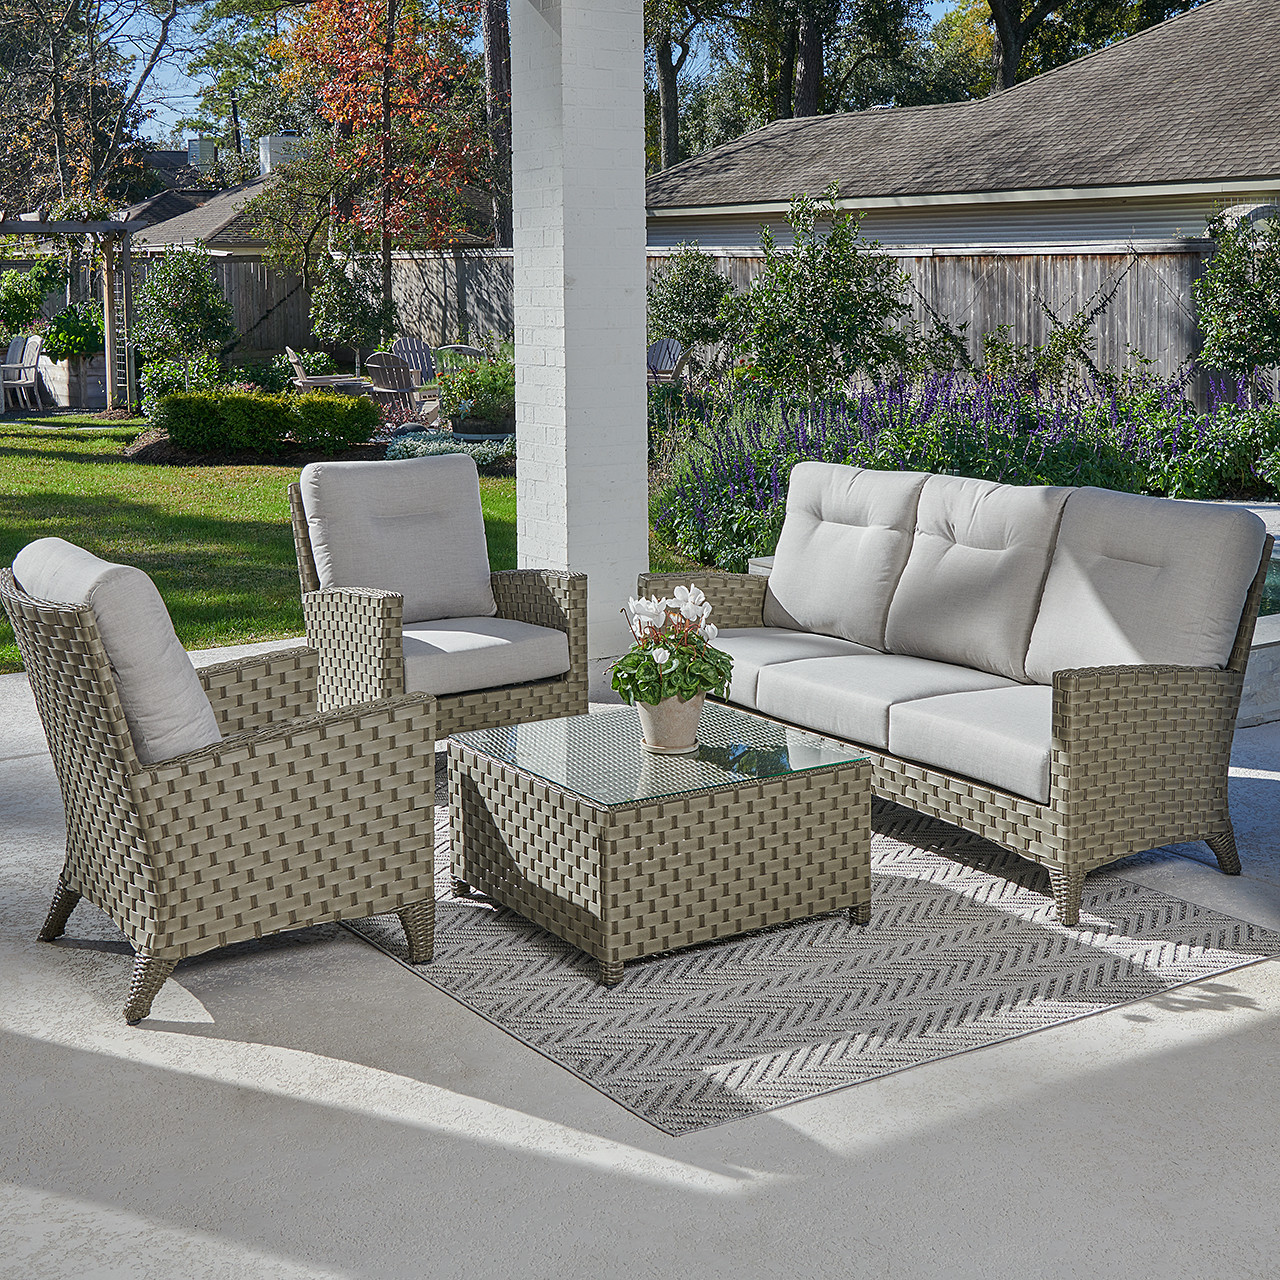 Gramercy Outdoor Wicker with Cushions 4 Piece Sofa Set + 32 in. Sq. Coffee Table